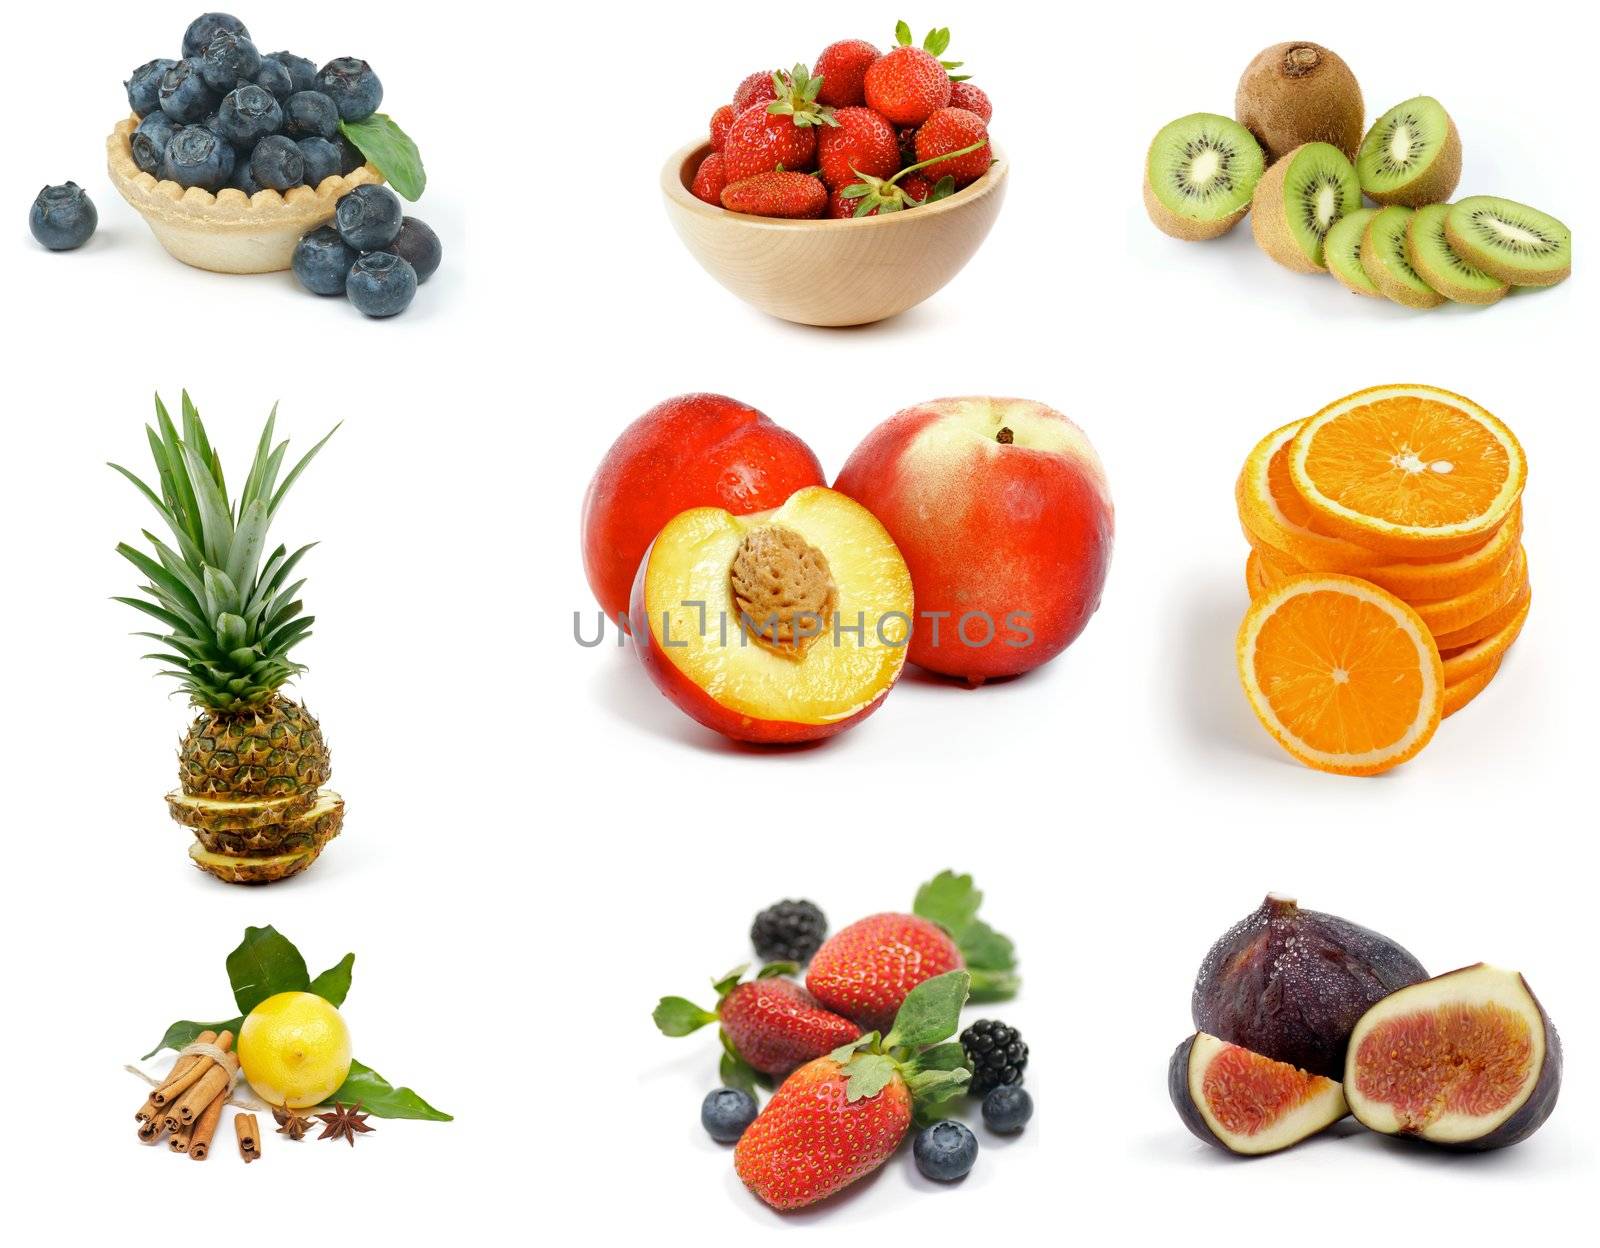 Fruits Collection with Blueberries, Strawberries, Kiwi, Pineapple, Slices of Orange, Nectarines, Lemon, Blackberries and Figs isolated on white background